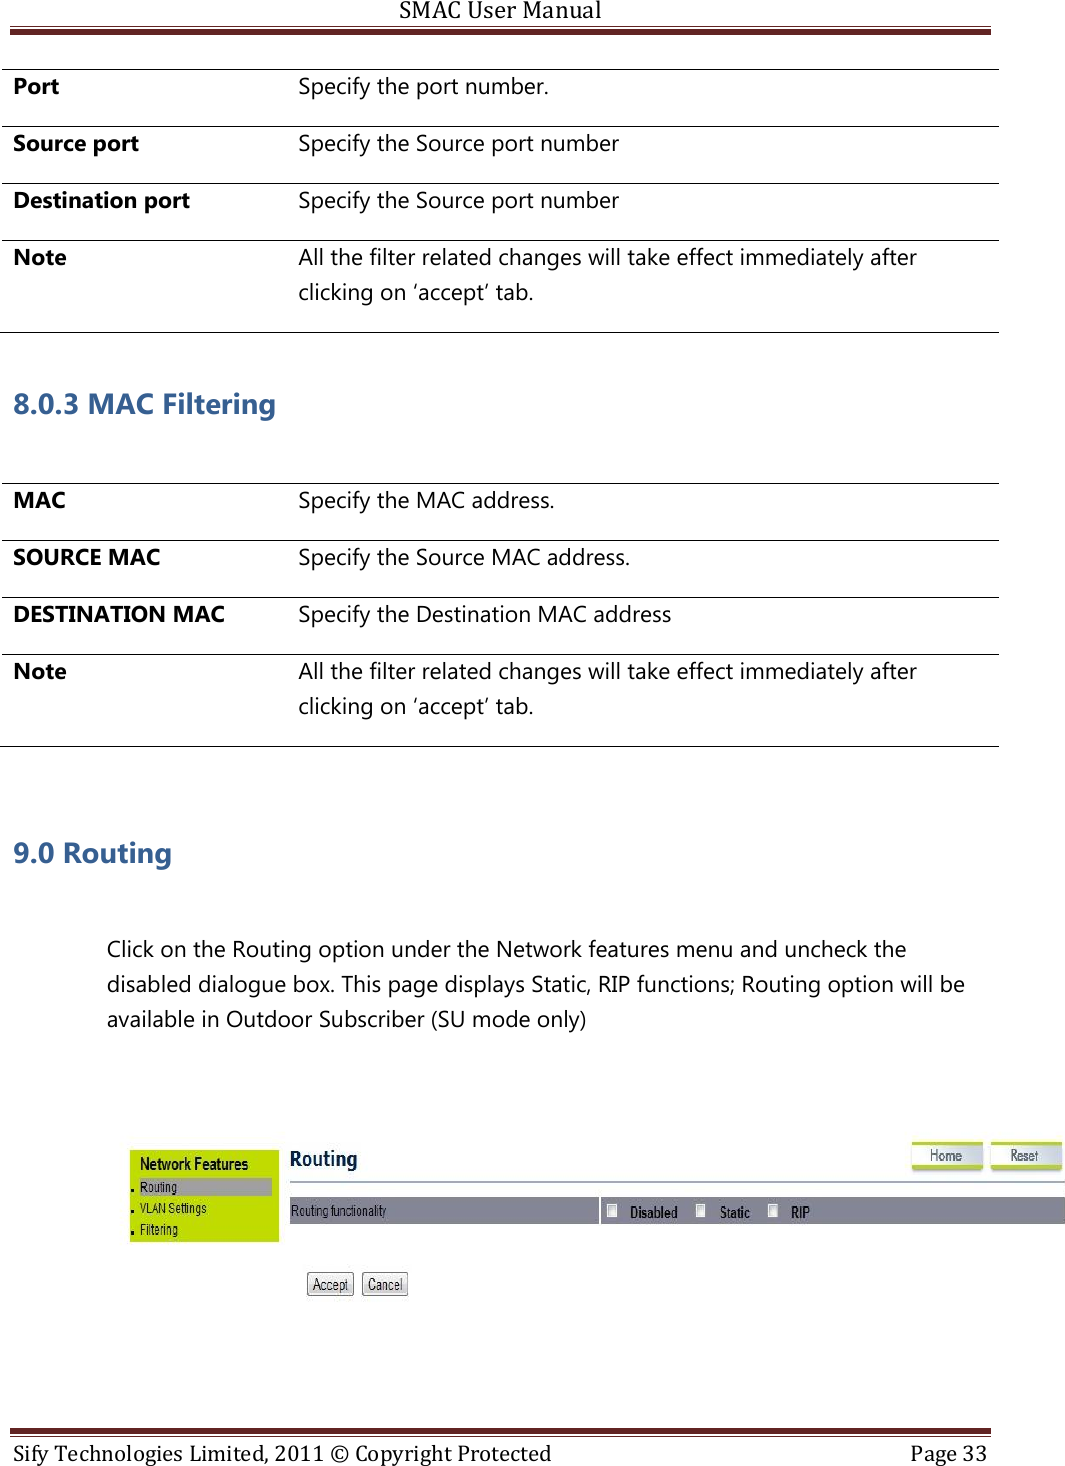 SMAC User Manual  Sify Technologies Limited, 2011 © Copyright Protected  Page 33  Port Specify the port number. Source port Specify the Source port number Destination port Specify the Source port number Note All the filter related changes will take effect immediately after clicking on ‘accept’ tab. 8.0.3 MAC Filtering   MAC Specify the MAC address. SOURCE MAC Specify the Source MAC address. DESTINATION MAC Specify the Destination MAC address Note All the filter related changes will take effect immediately after clicking on ‘accept’ tab.  9.0 Routing    Click on the Routing option under the Network features menu and uncheck the disabled dialogue box. This page displays Static, RIP functions; Routing option will be available in Outdoor Subscriber (SU mode only)    